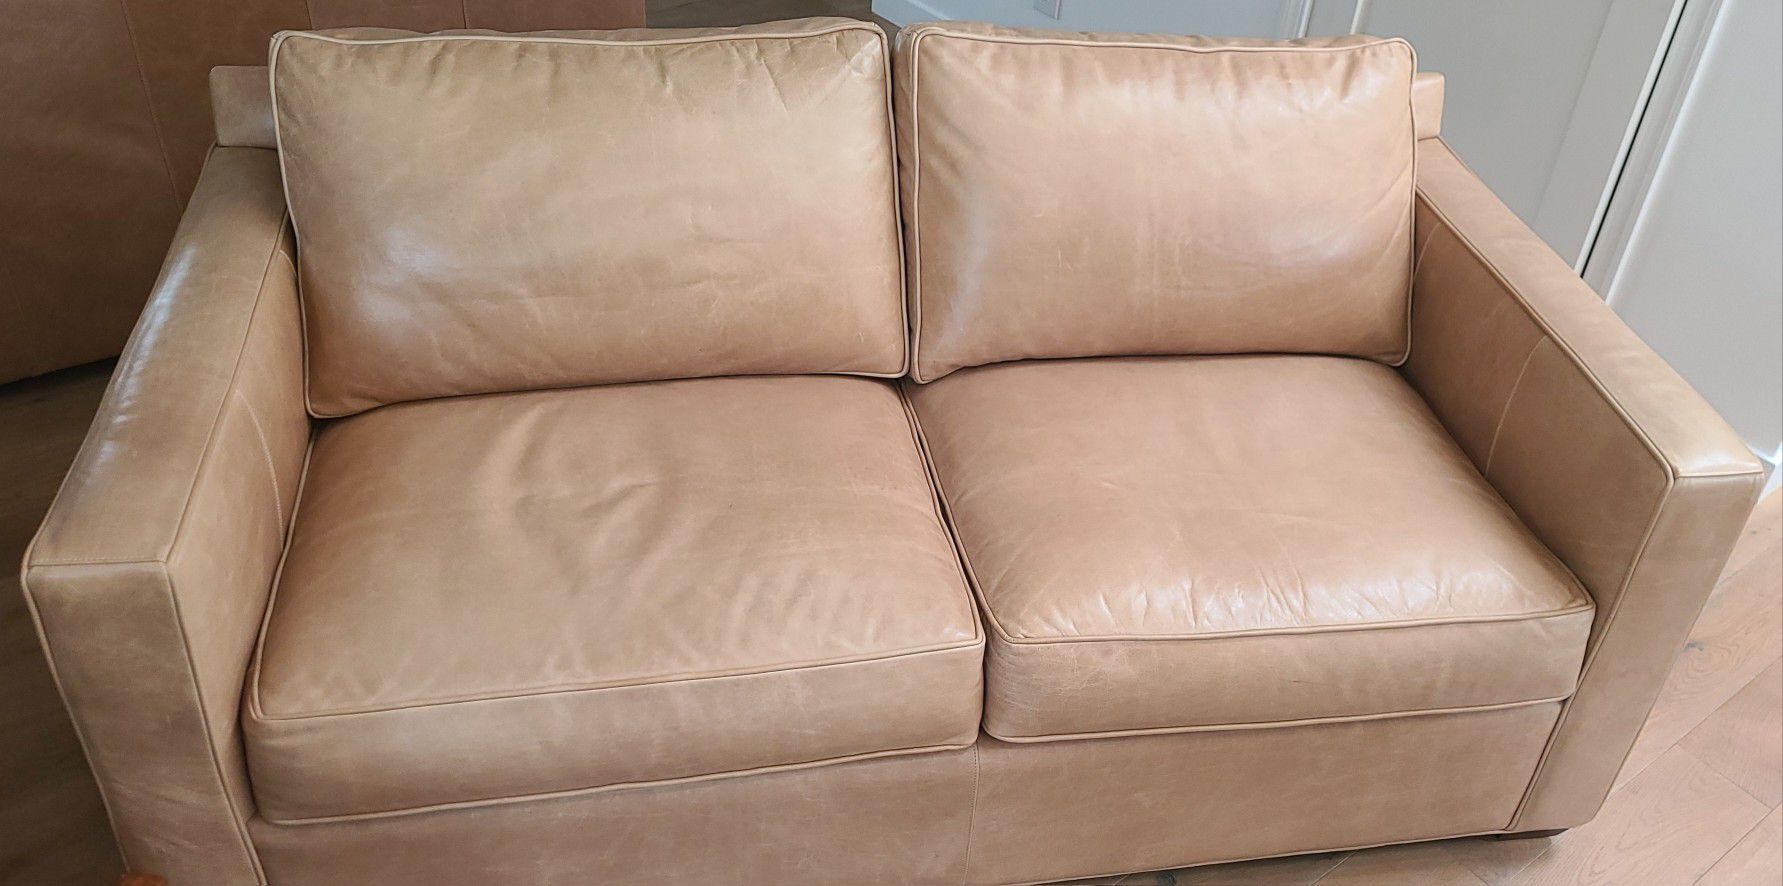 ~~~Crate And Barrel Leather Sofa~~~